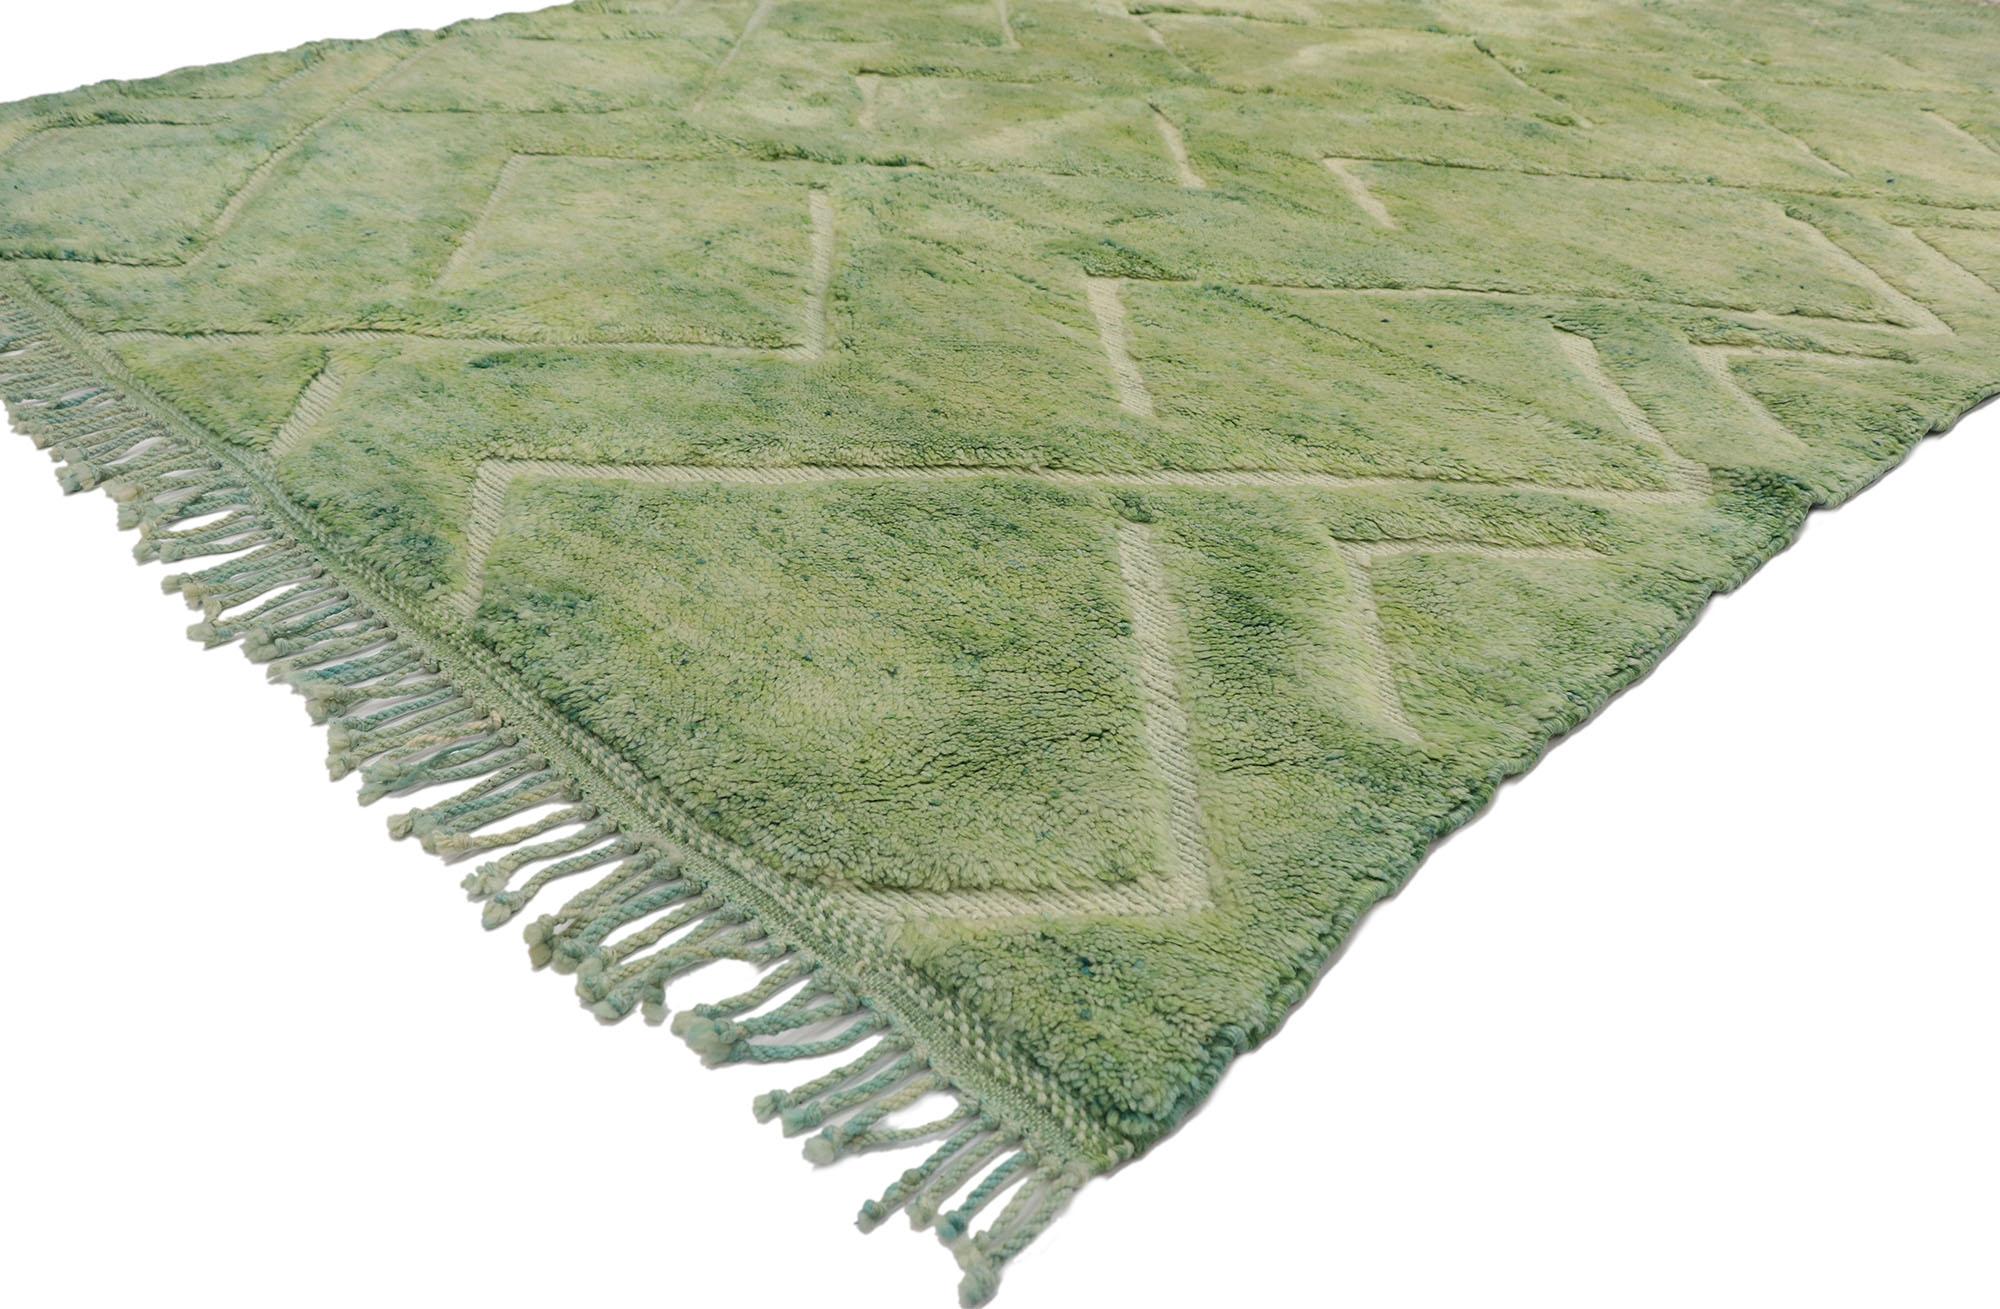 21183 Soft Green Berber Moroccan Rug,06'10 x 10'00. 
Emulating Biophilic Design with incredible detail and texture, this hand knotted wool Berber Moroccan rug is a captivating vision of woven beauty. The hand-carved diamond design and soft green